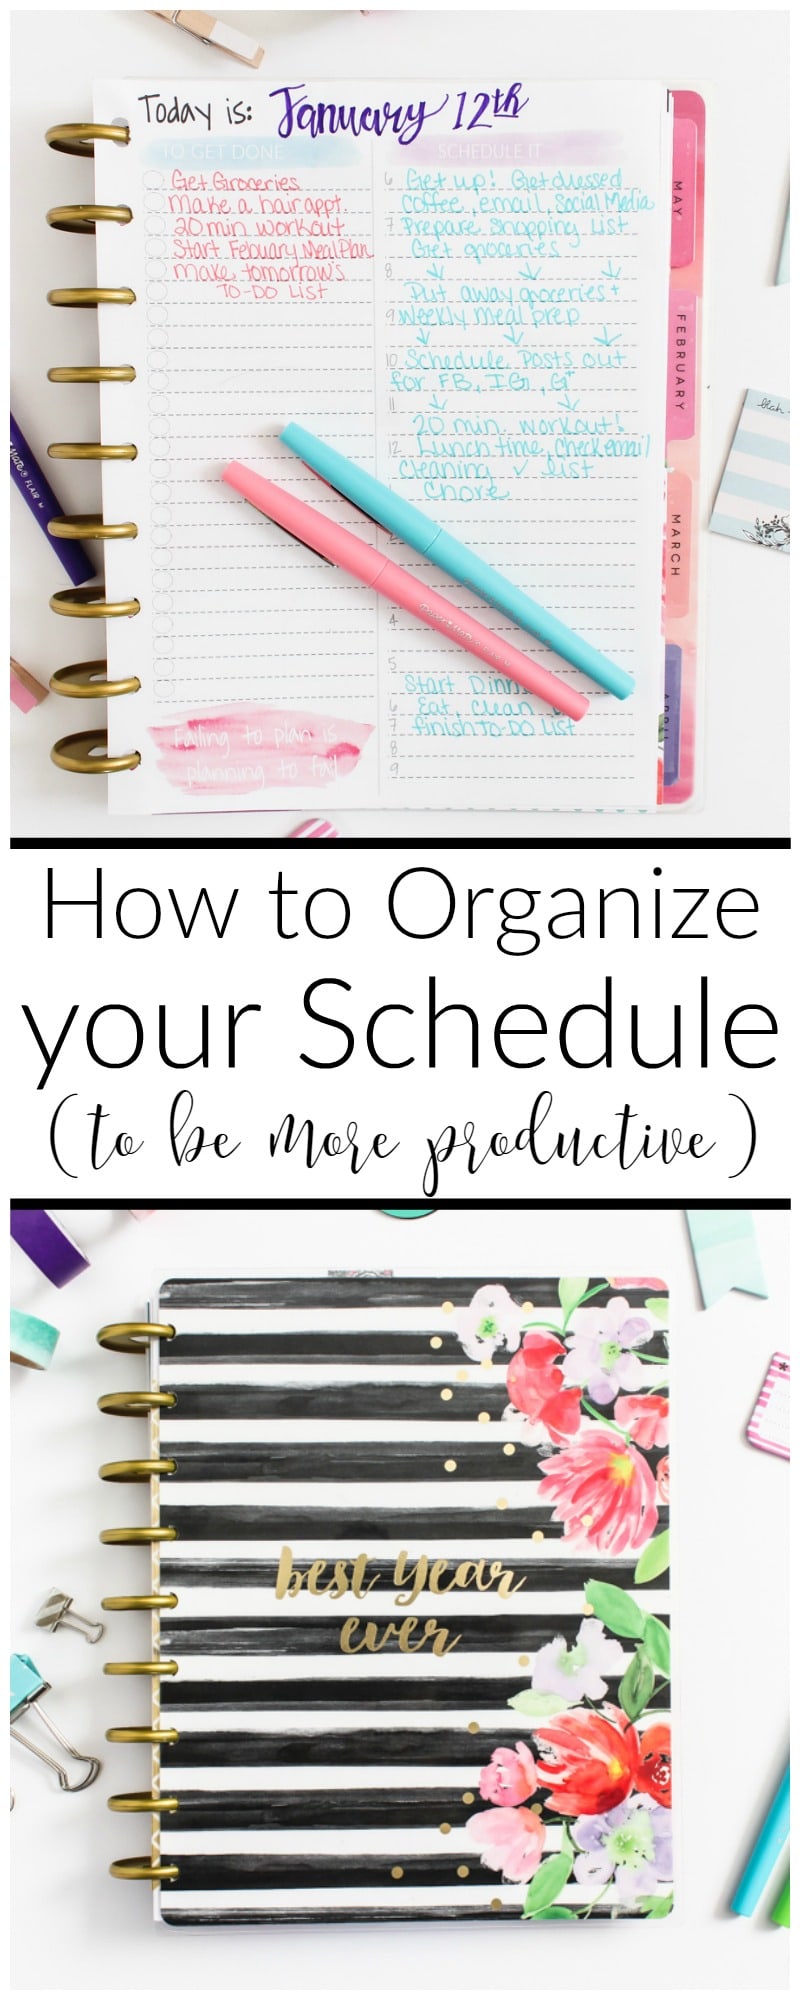 How to Organize your schedule to be more productive